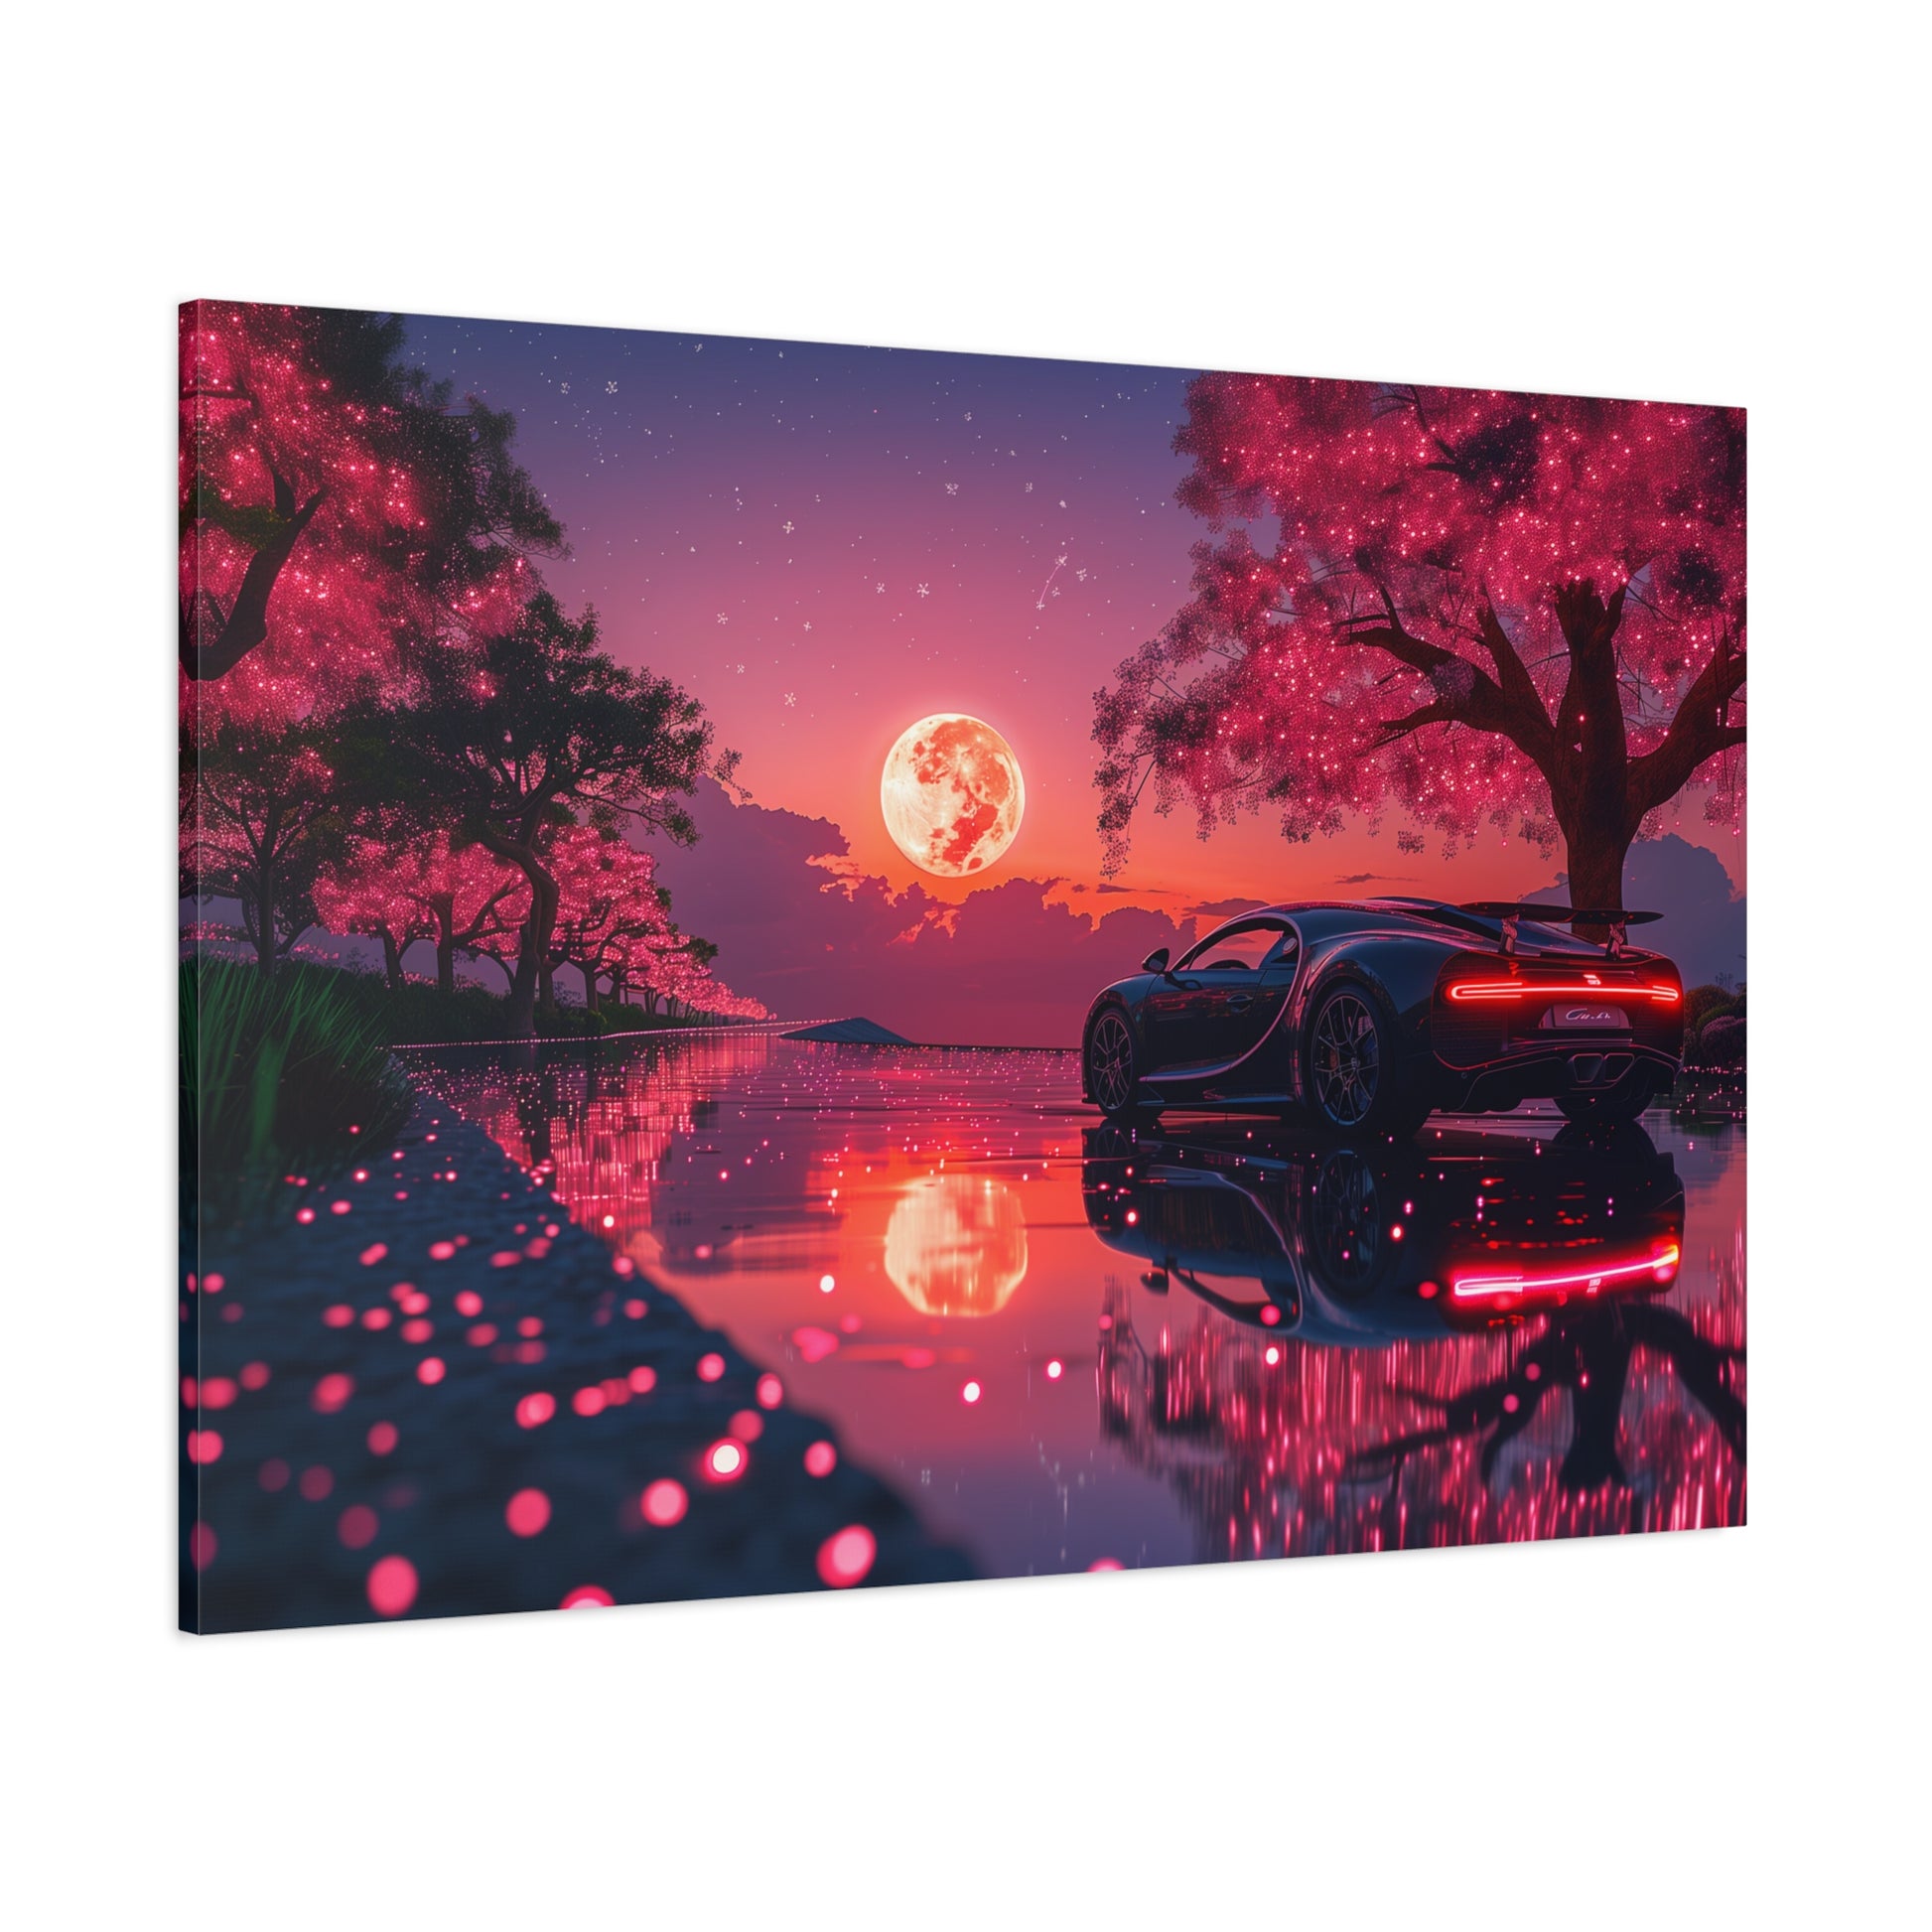 Twilight Velocity (Canvas)Twilight Velocity (Canvas  Matte finish, stretched, with a depth of 1.25 inches) Elevate your décor with RimaGallery’s responsibly made art canvases. Our eco-friendlRimaGallery